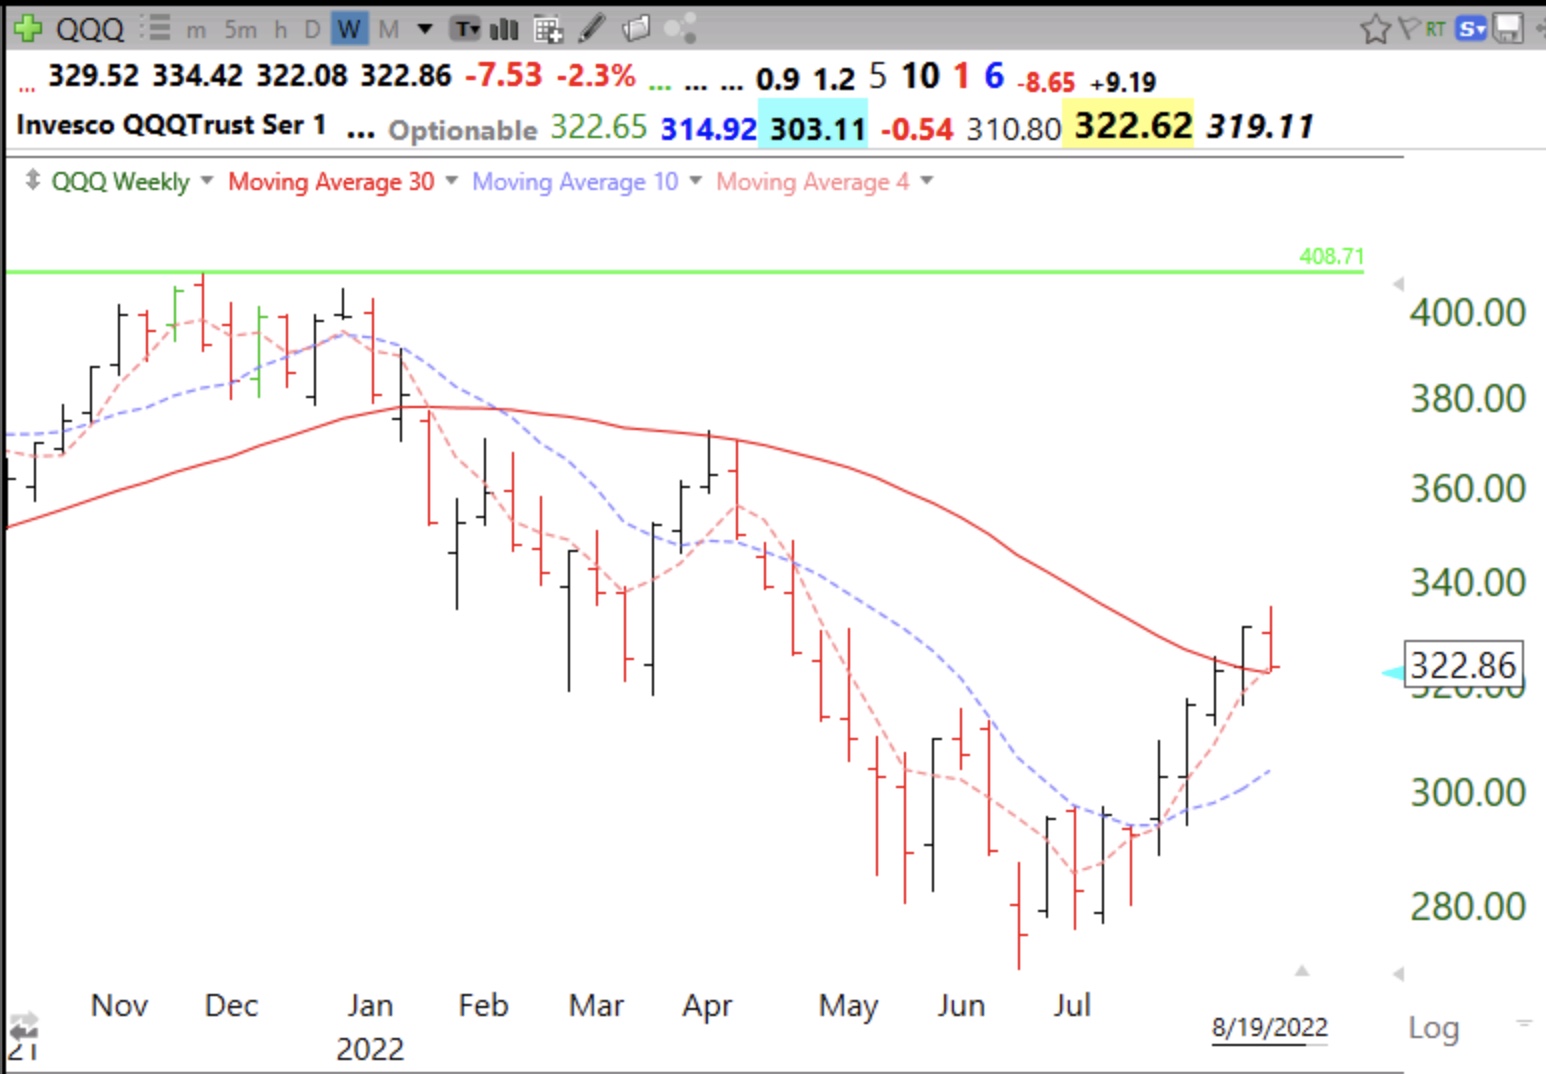 Blog Post: This week may tell us whether the recent bounce was